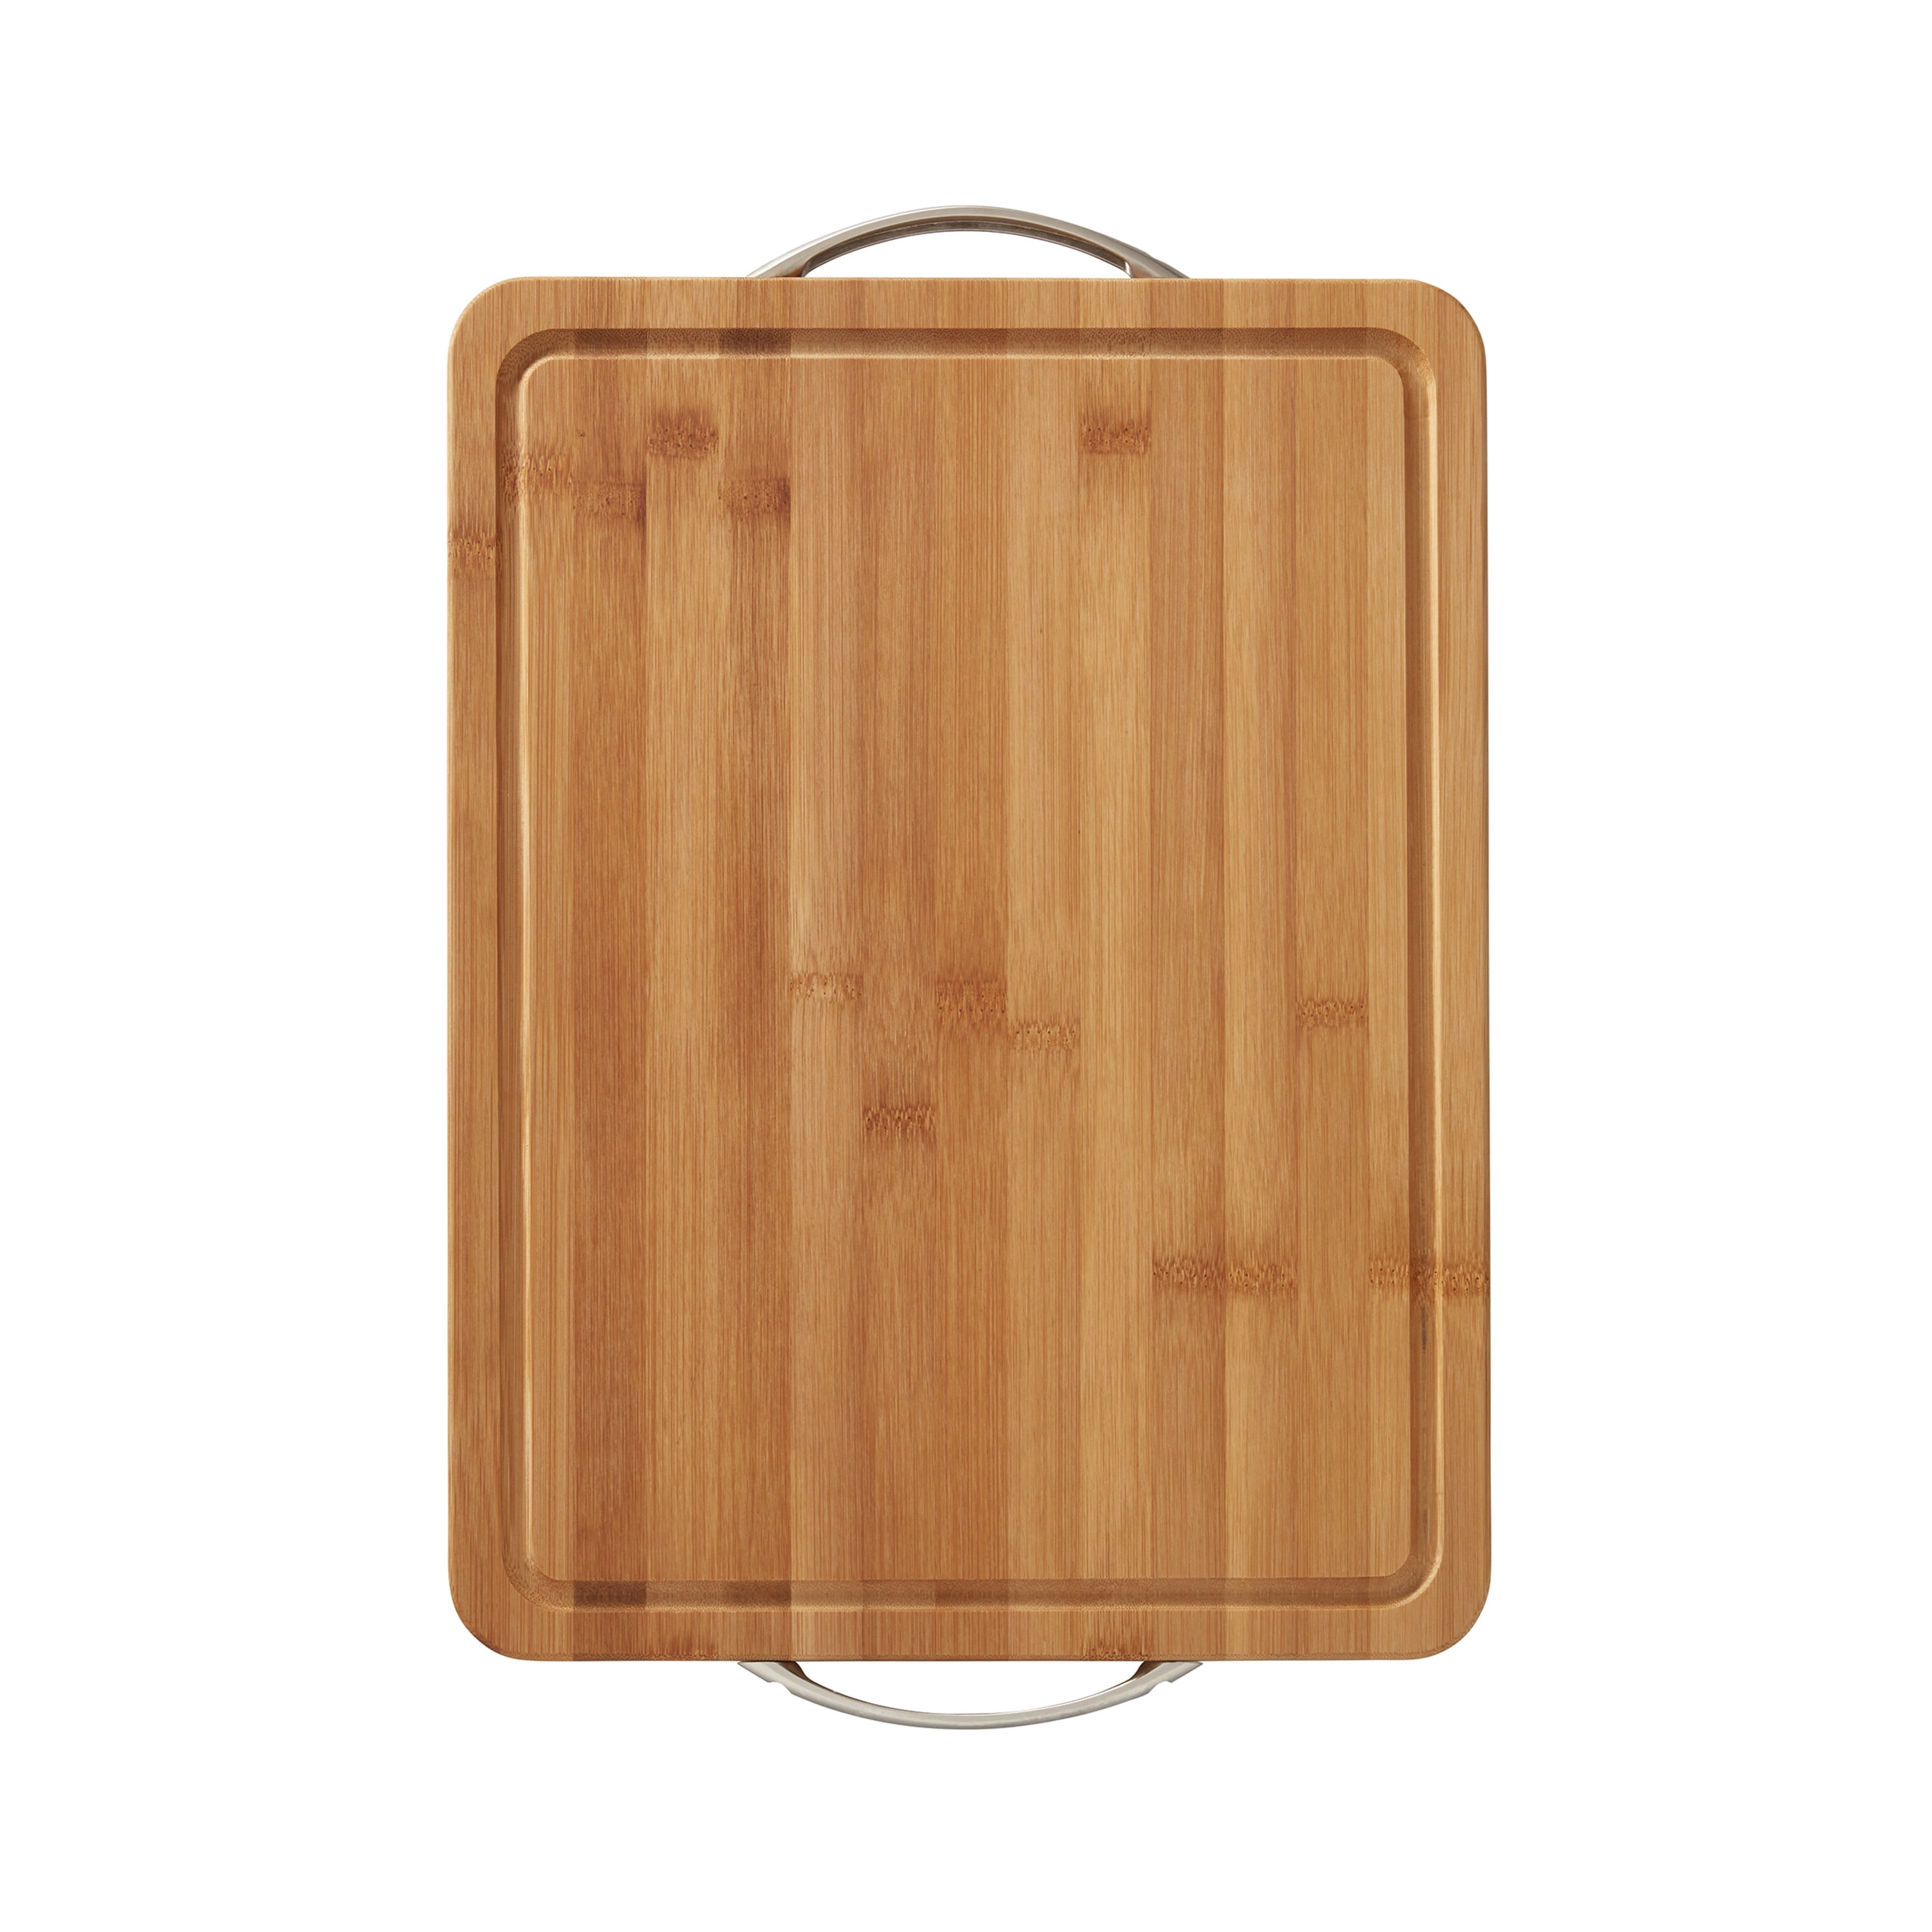 Farberware 12-inch x 16-inch Bamboo Cutting Board with Trench and Metal Handles